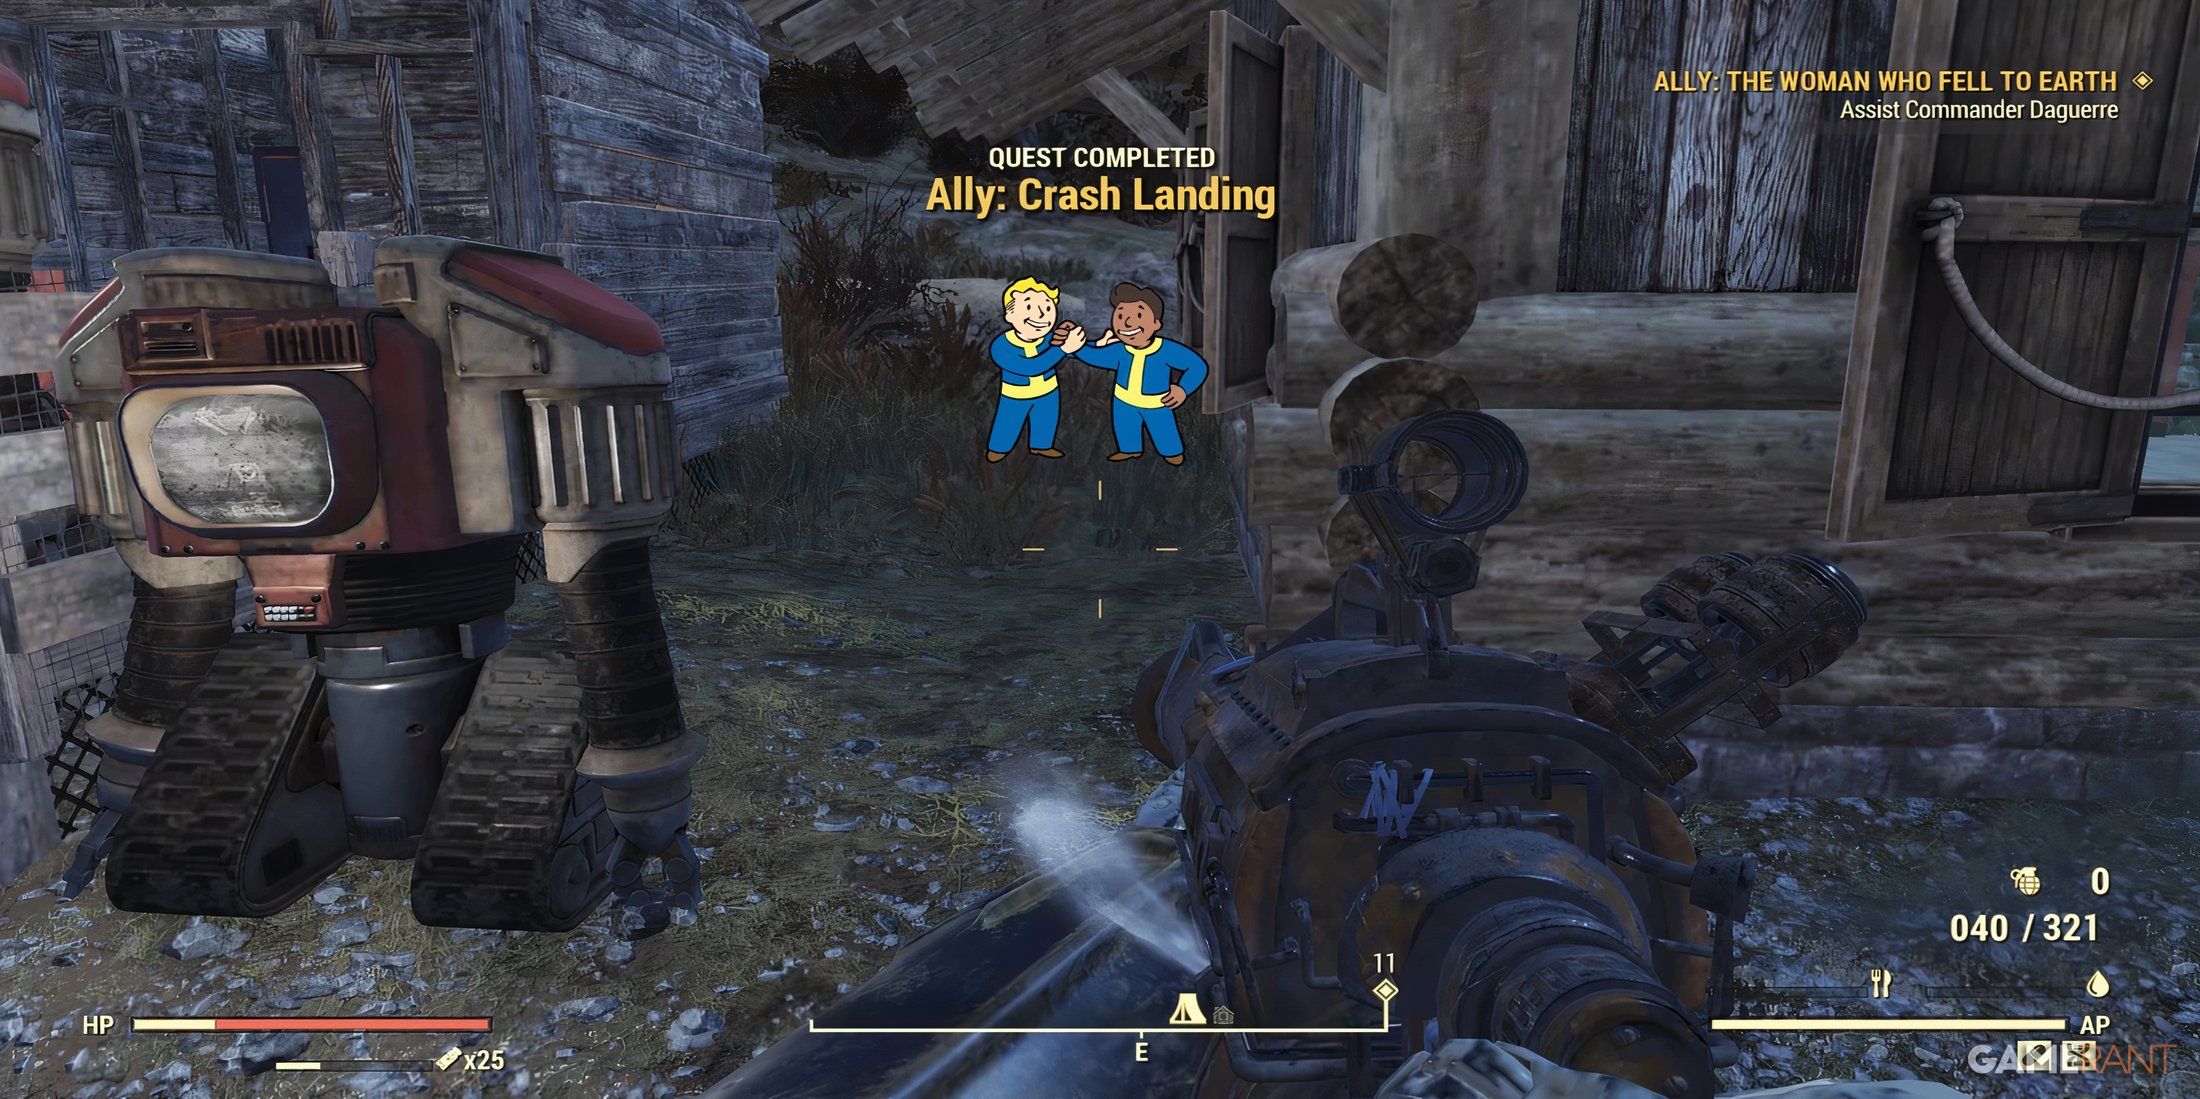 Crash Landing Completed in Fallout 76